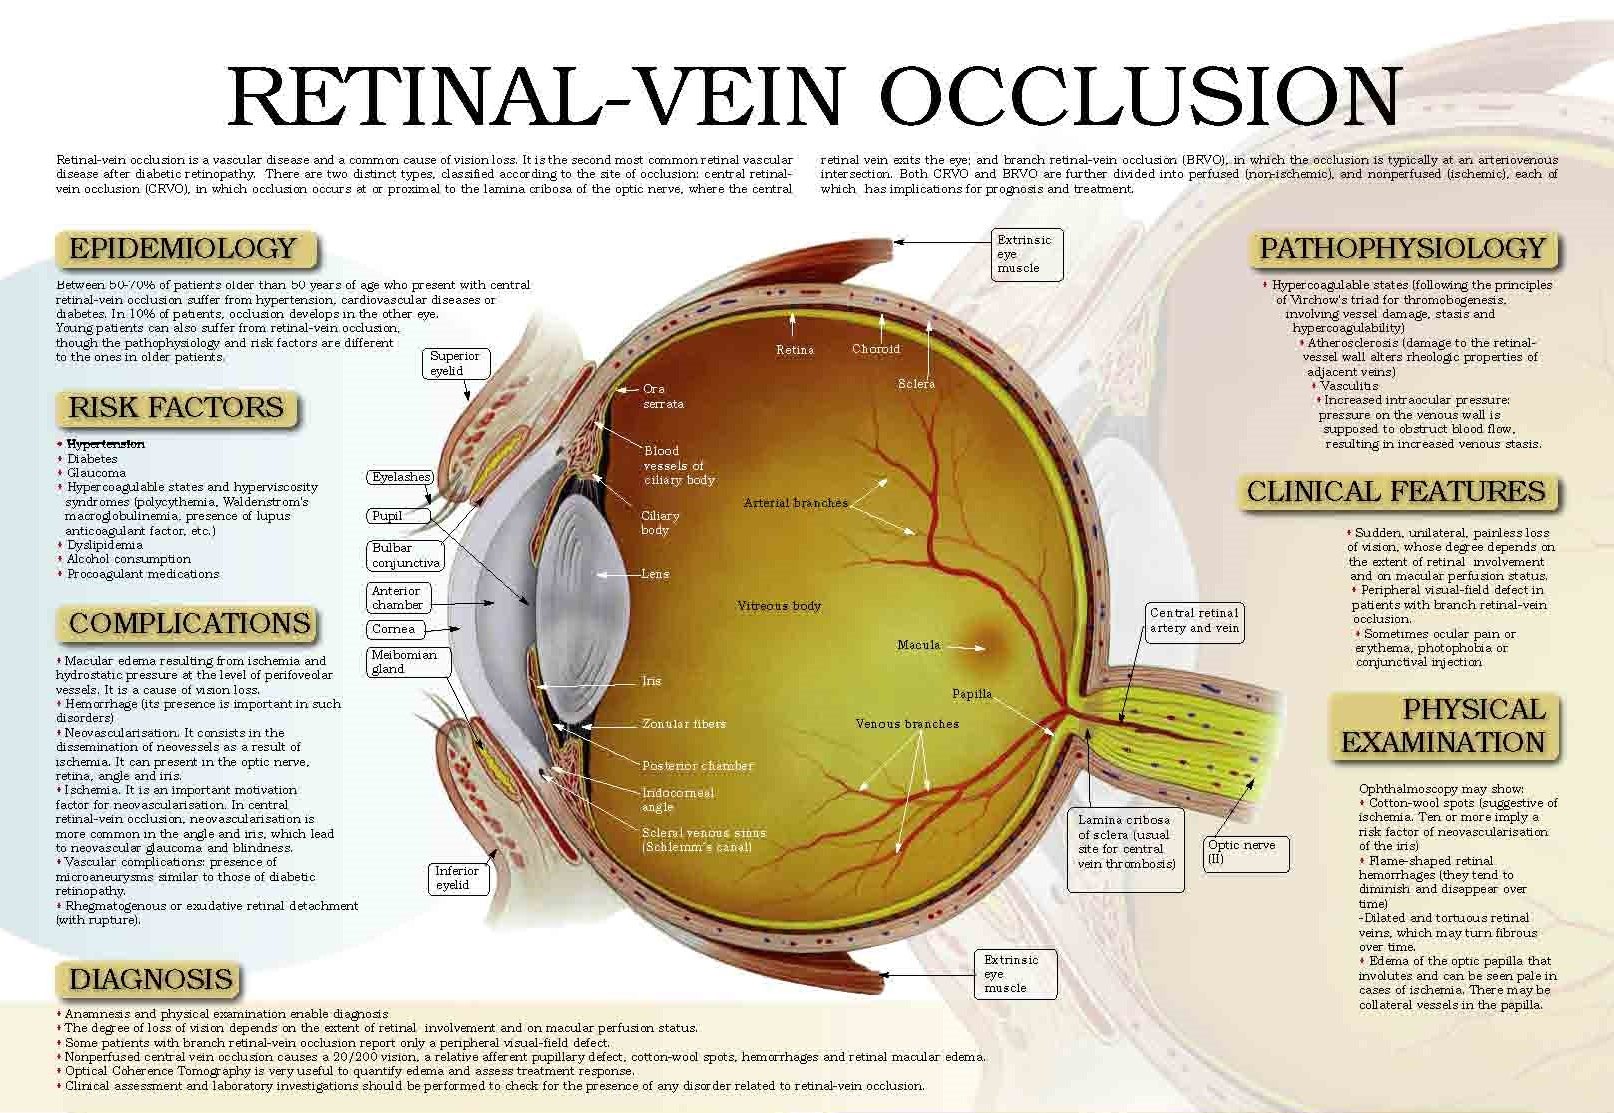 20,000% increase in retinal eye damage after COVID-19 vaccination